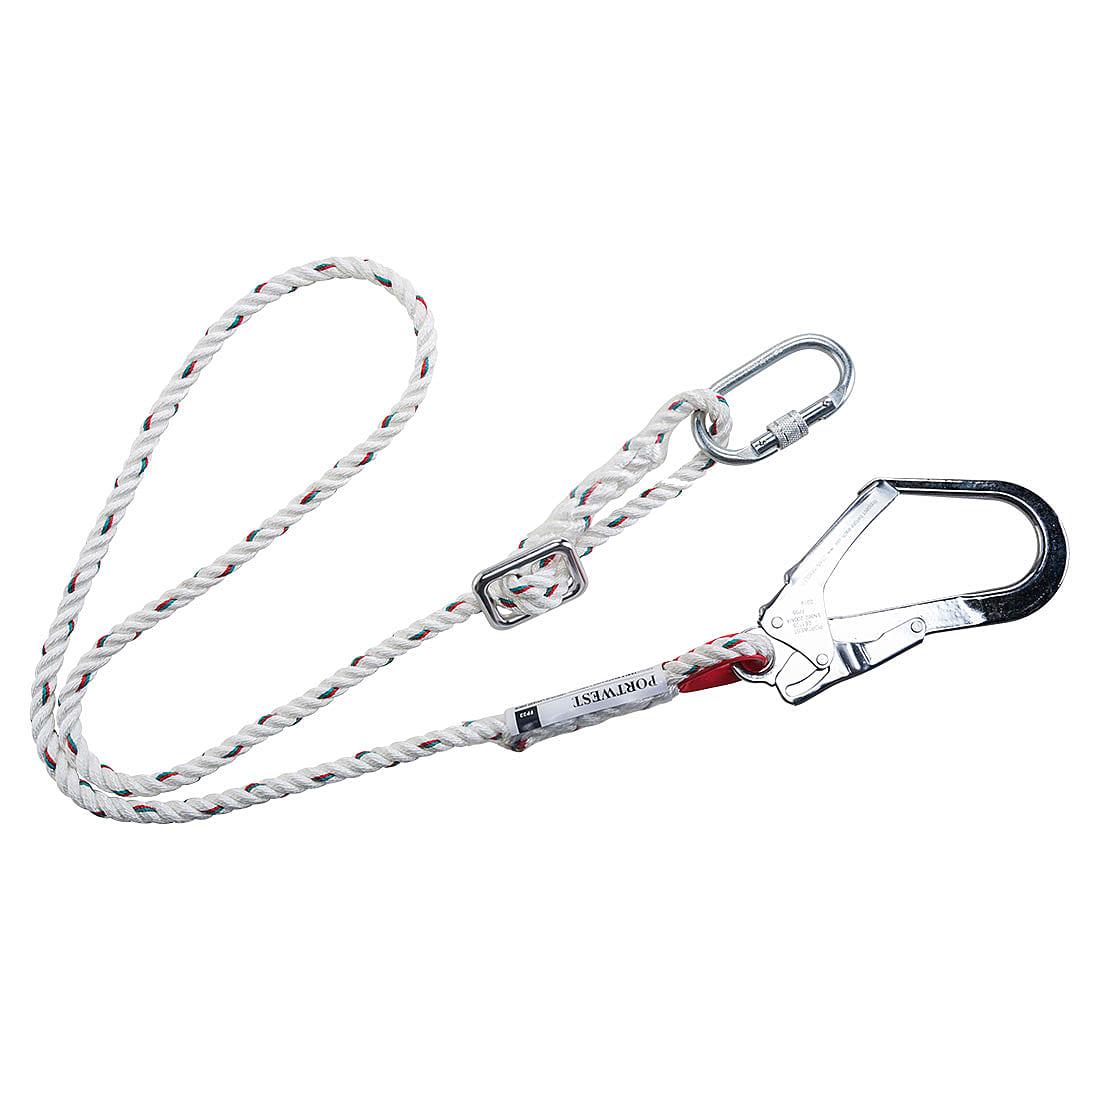 Portwest Adjustable Restraint Lanyard in White (Product Code: FP22)